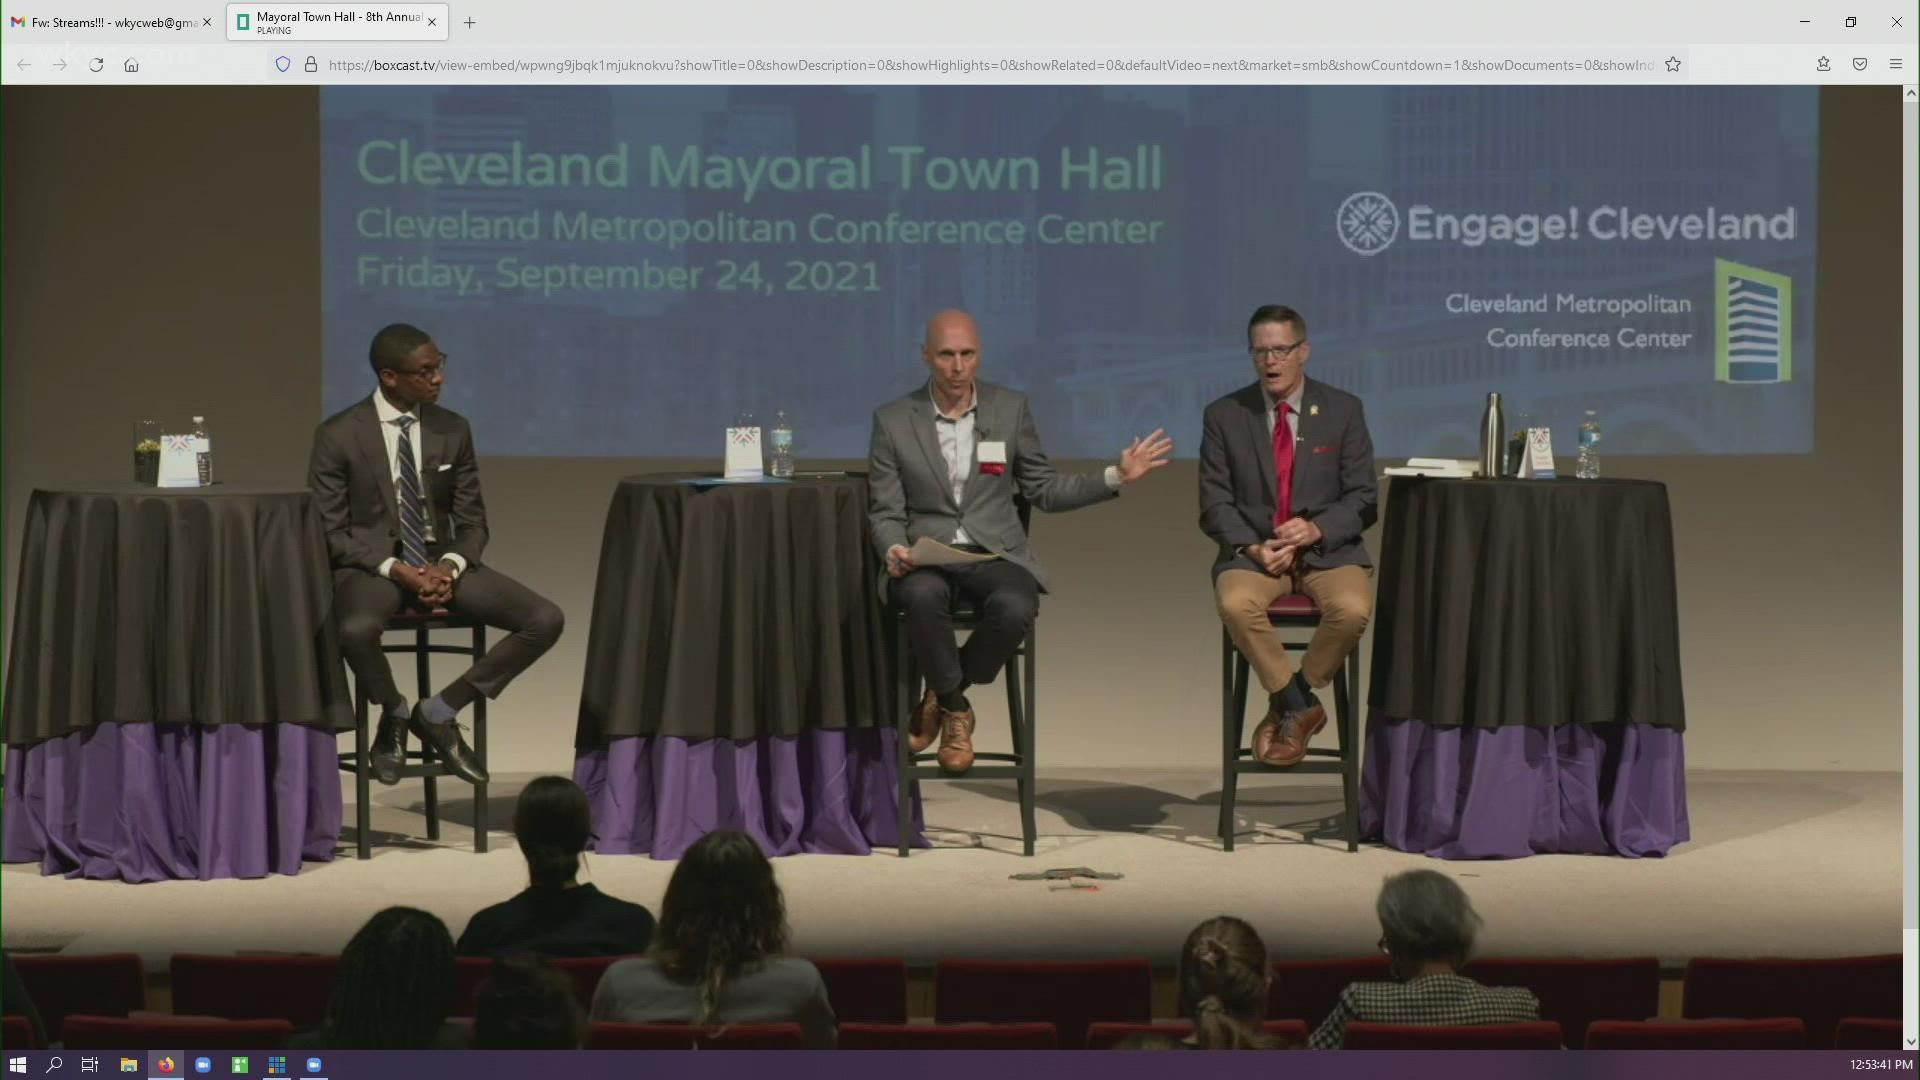 Kevin Kelley and Justin Bibb spoke at Engage! Cleveland's town hall on Friday. 3News' Mark Naymik served as moderator.